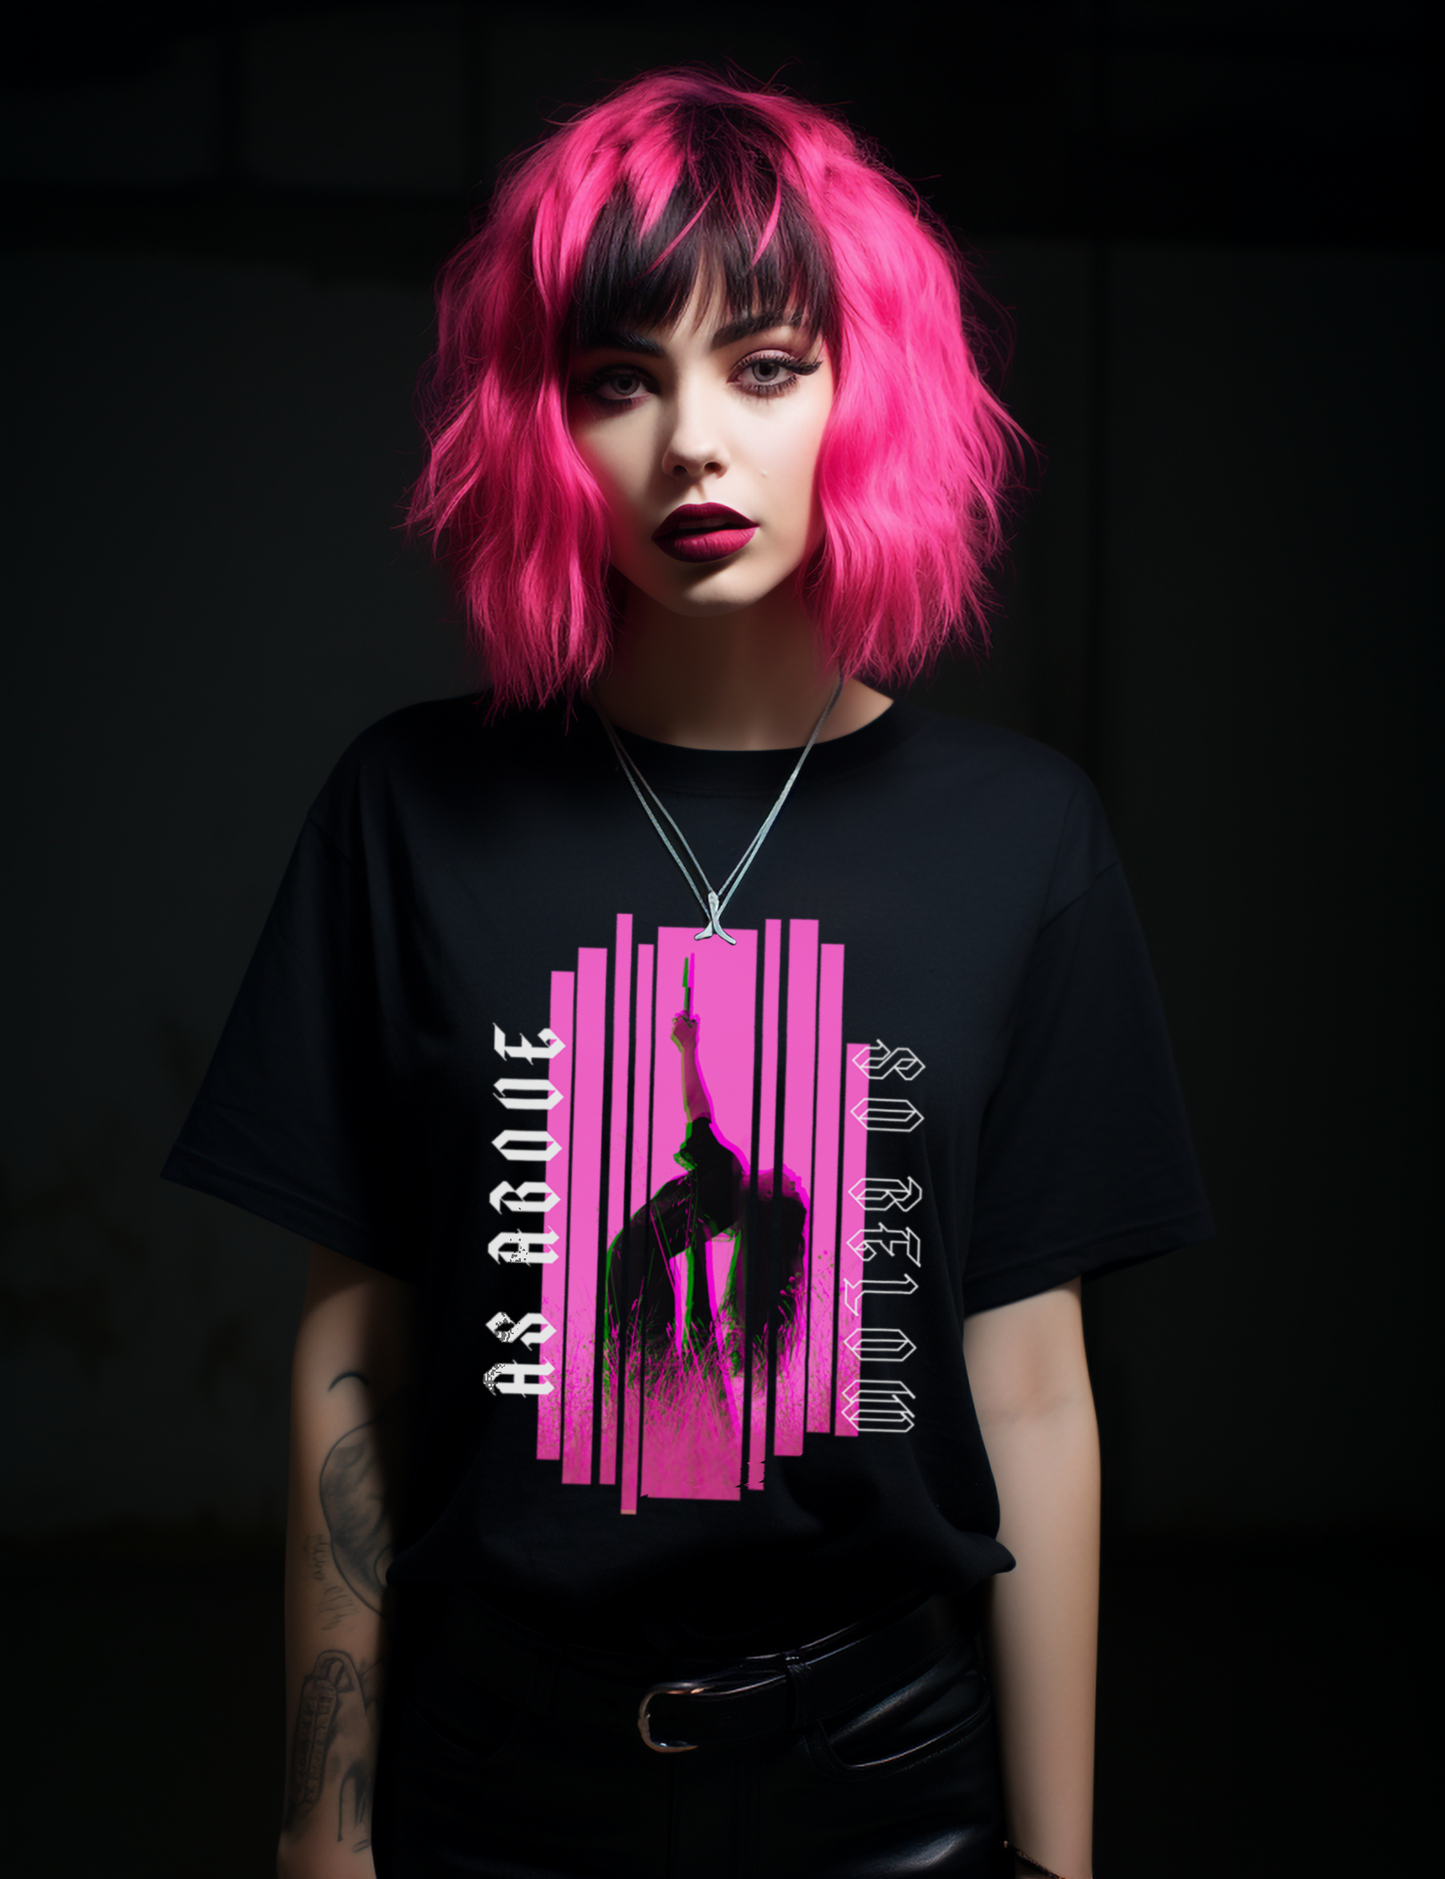 As Above So Below Edgy Glitch Alt Clothing Plus Size Neon Pink Goth Shirt